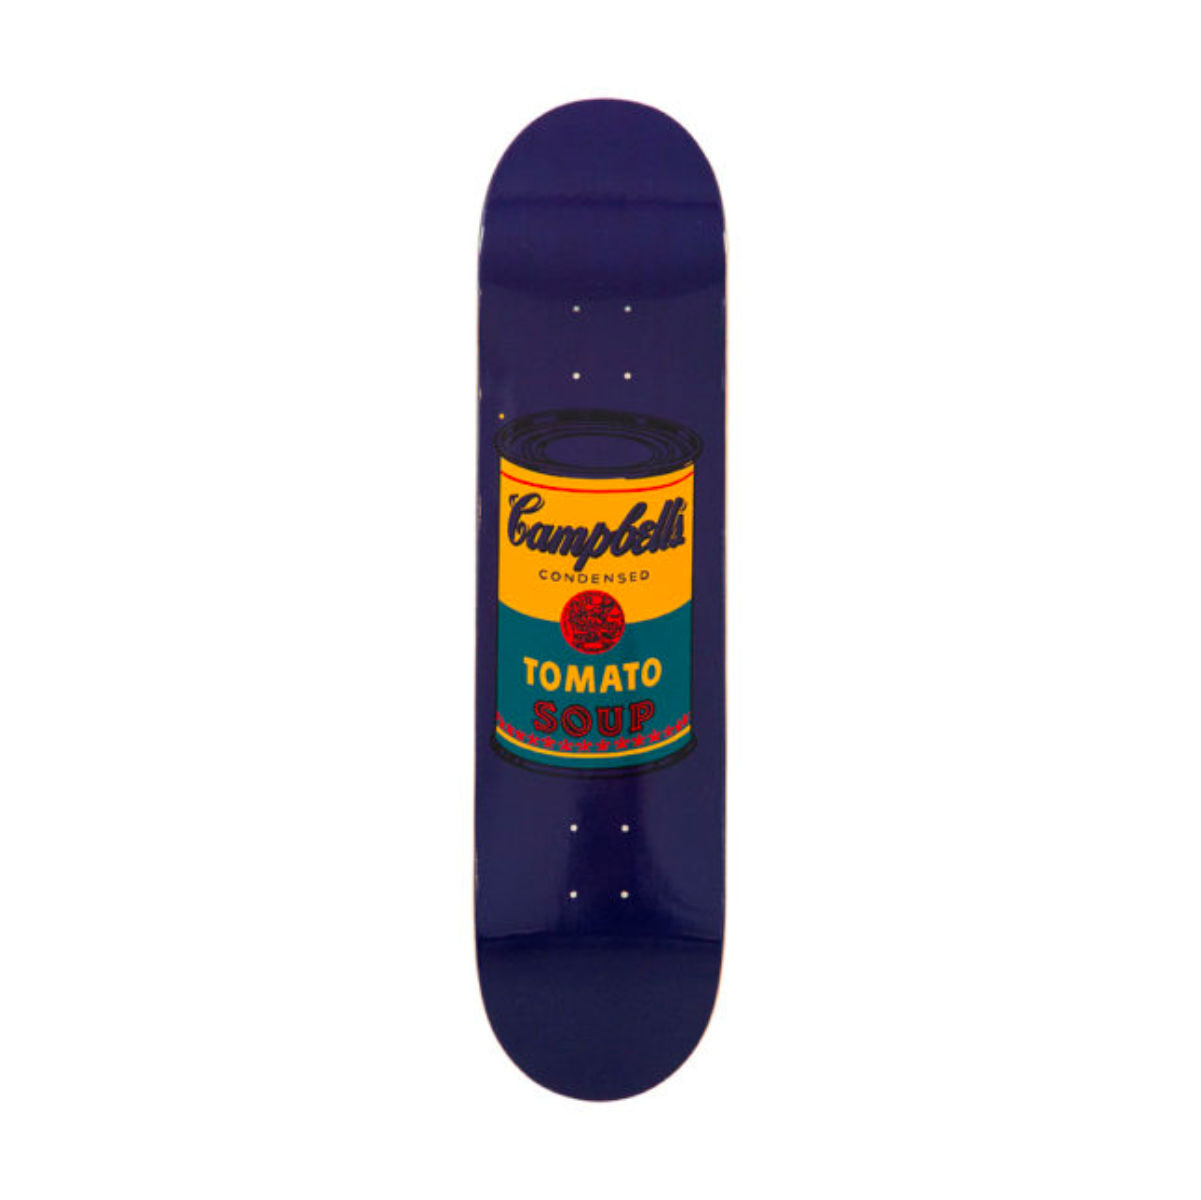 Andy Warhol The Skateroom Skateboard , Andy Warhol Colored Campbell's Soup teal